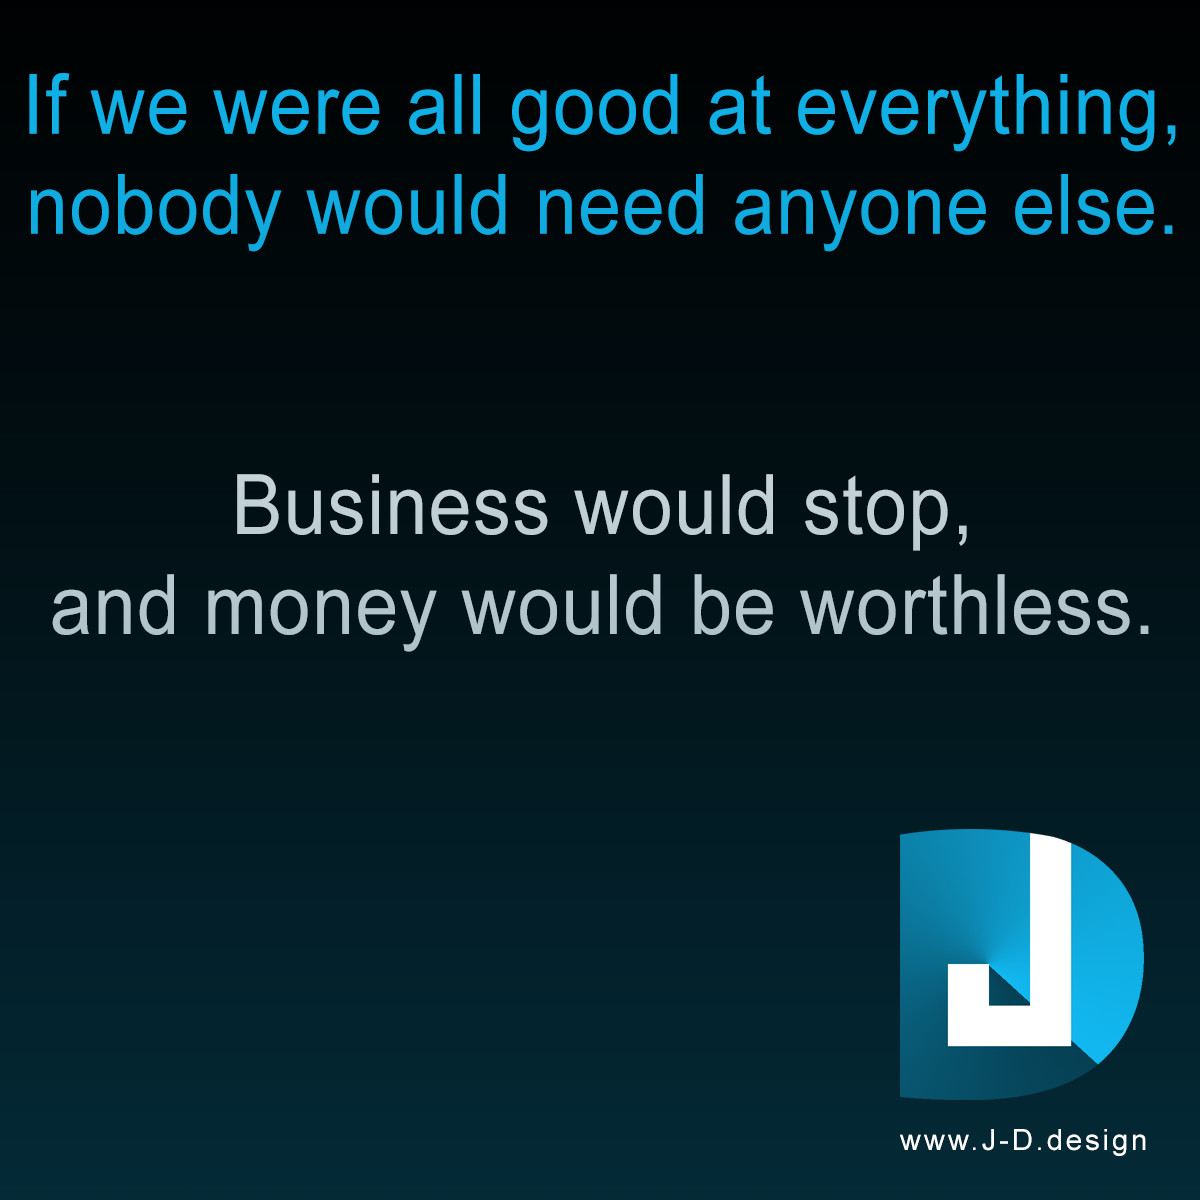 If we were all good at everything, nobody would need anyone else. Business would stop, and money would be worthless.